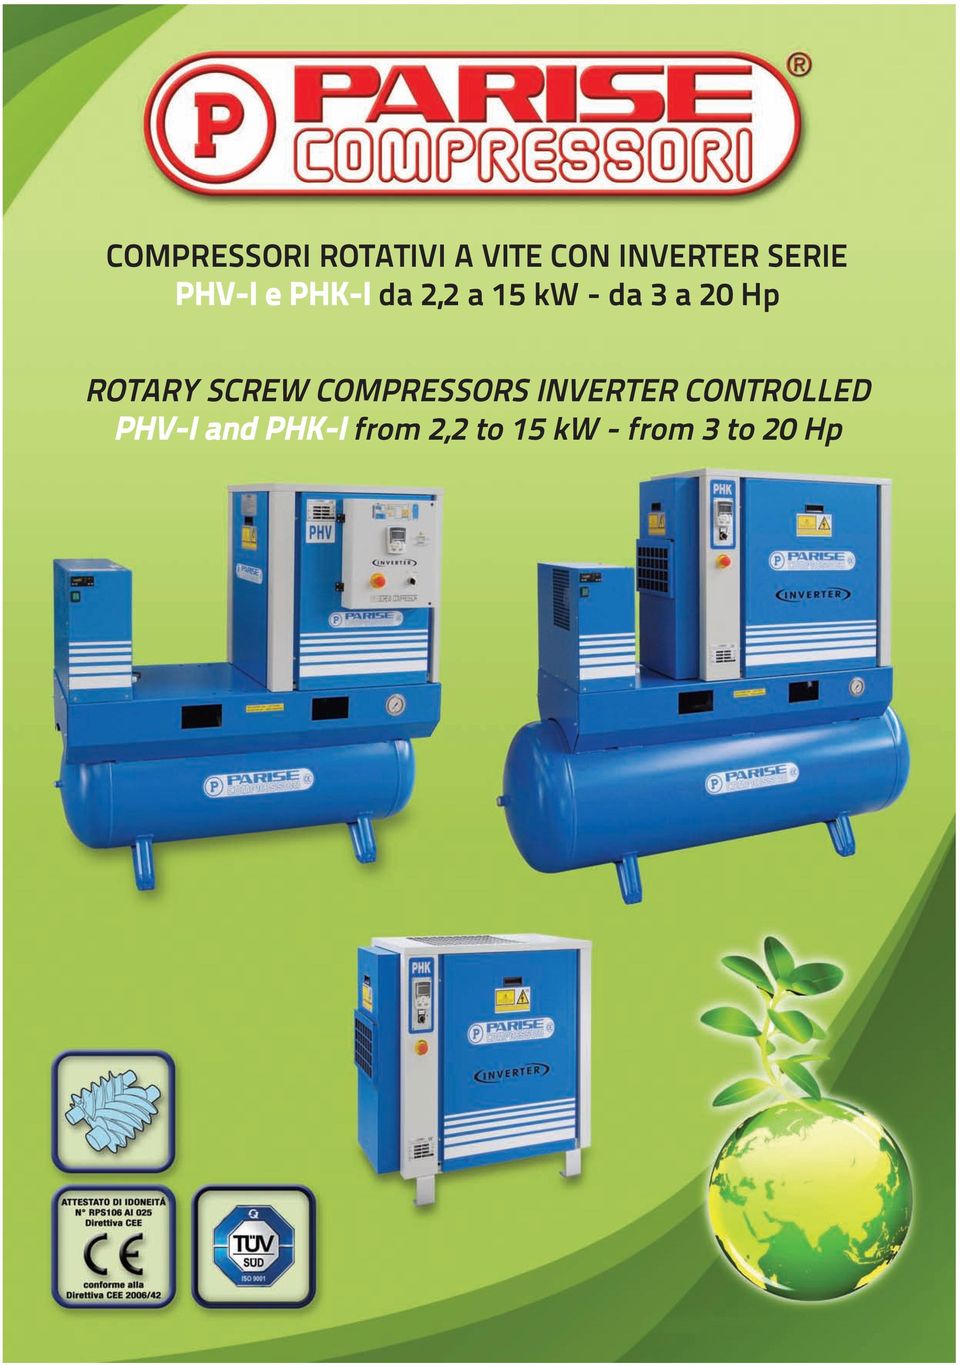 ROTARY SCREW COMPRESSORS INVERTER CONTROLLED